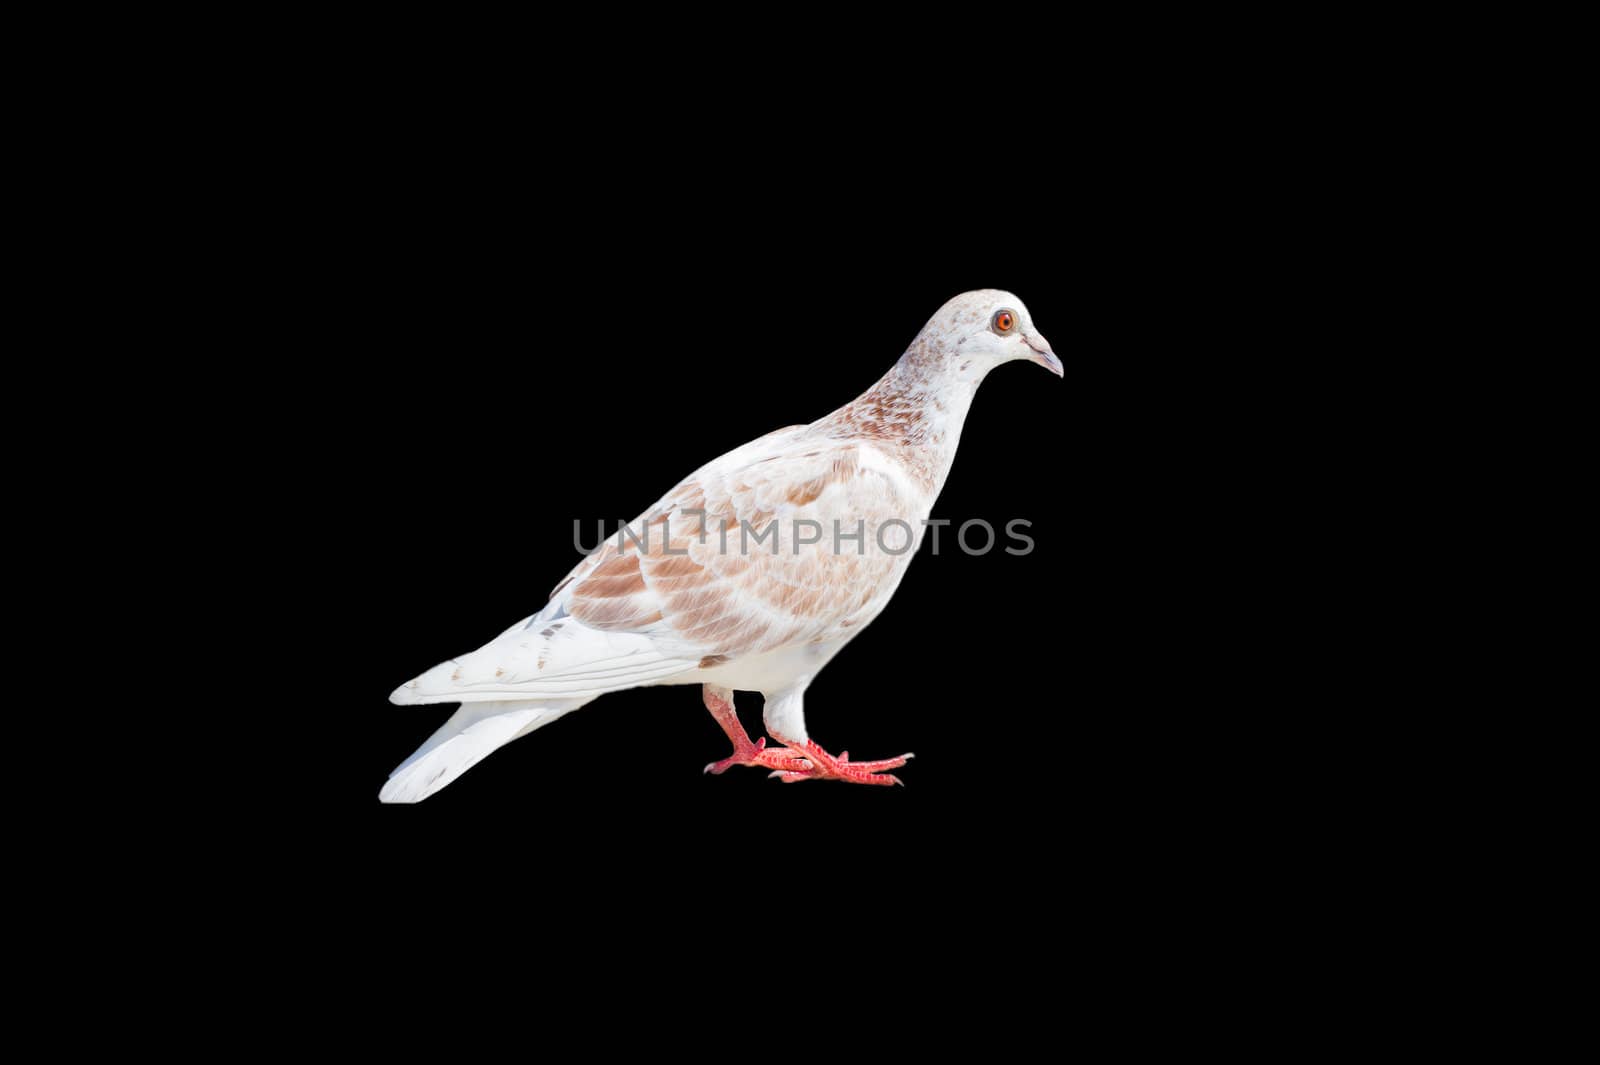 One white-brown pigeon isolated on black background